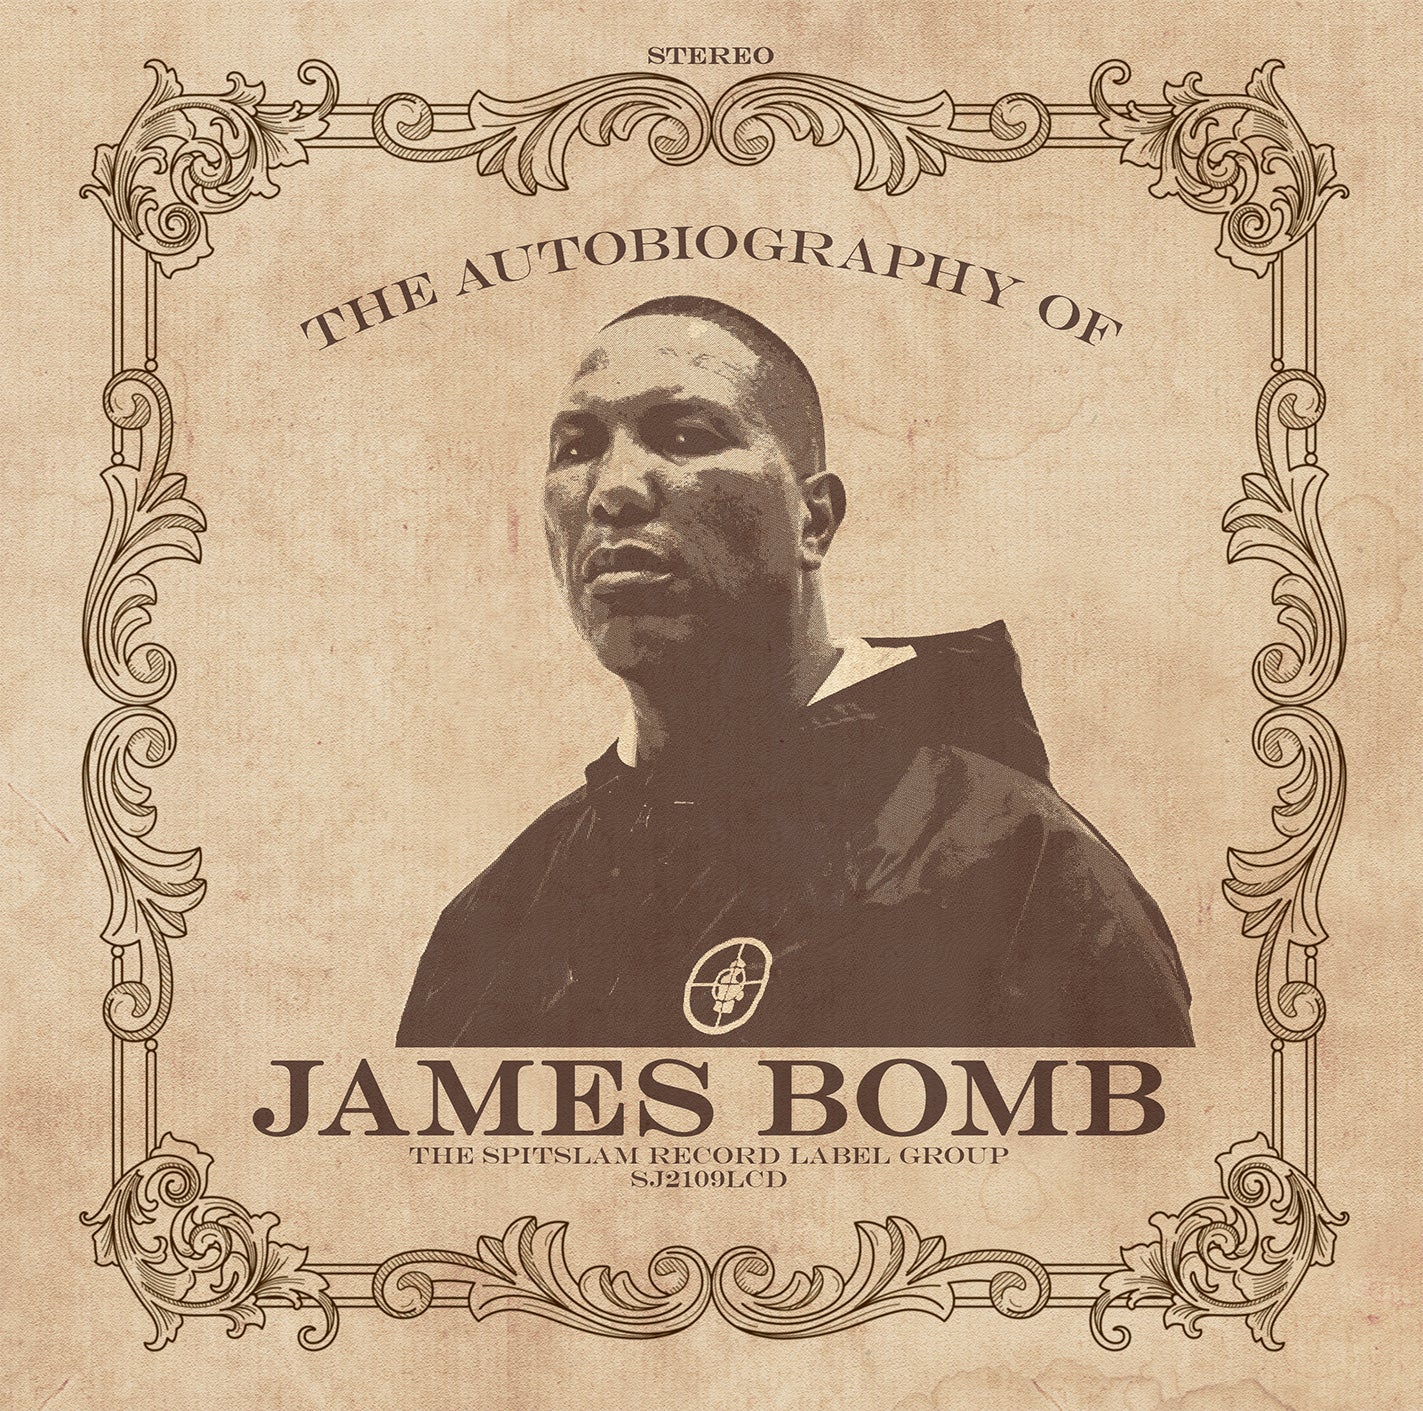 James Bomb - The Autobiography Of (CD-R)